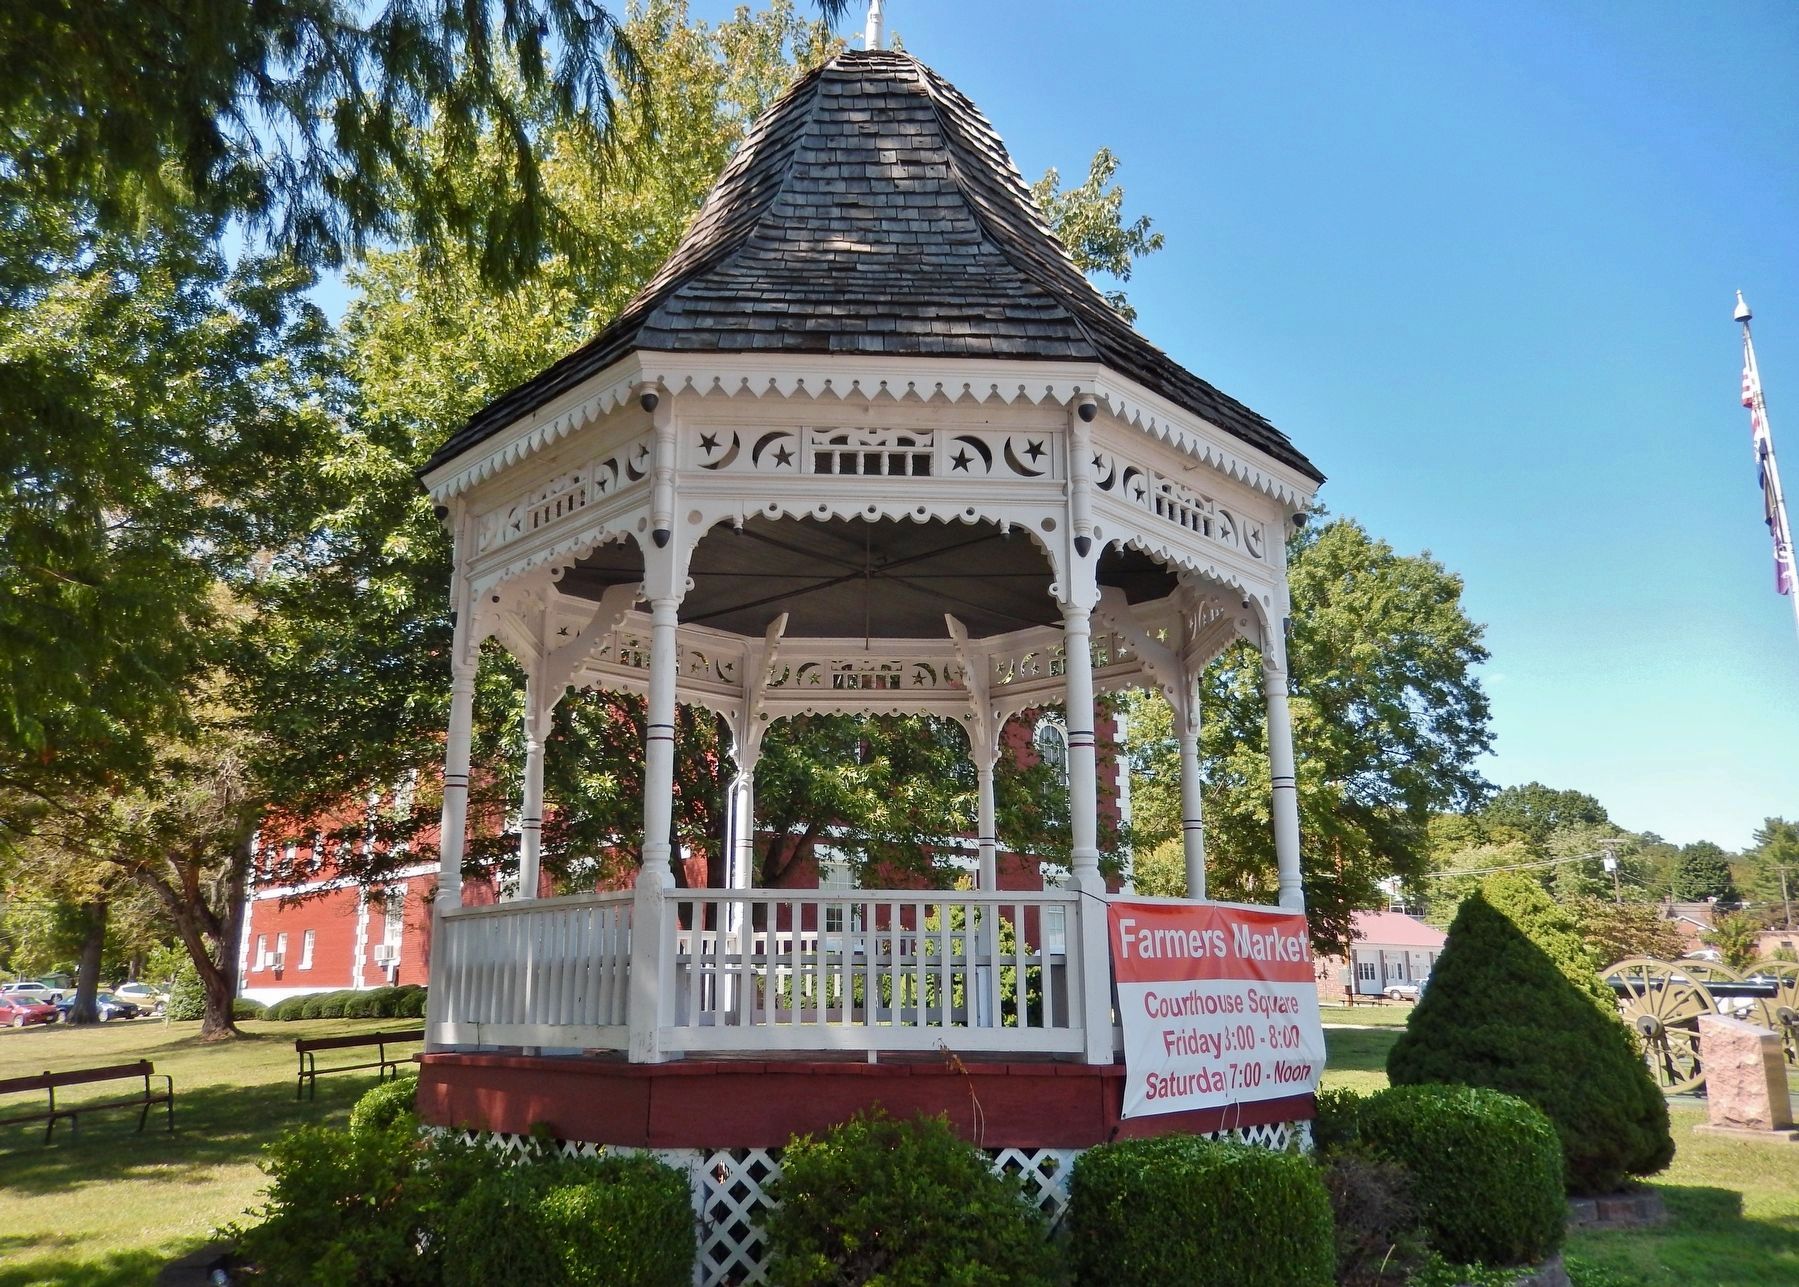 1899 Iron County Missouri Gazebo (<i>also included in National Register Historic Places listing</i>) image. Click for full size.